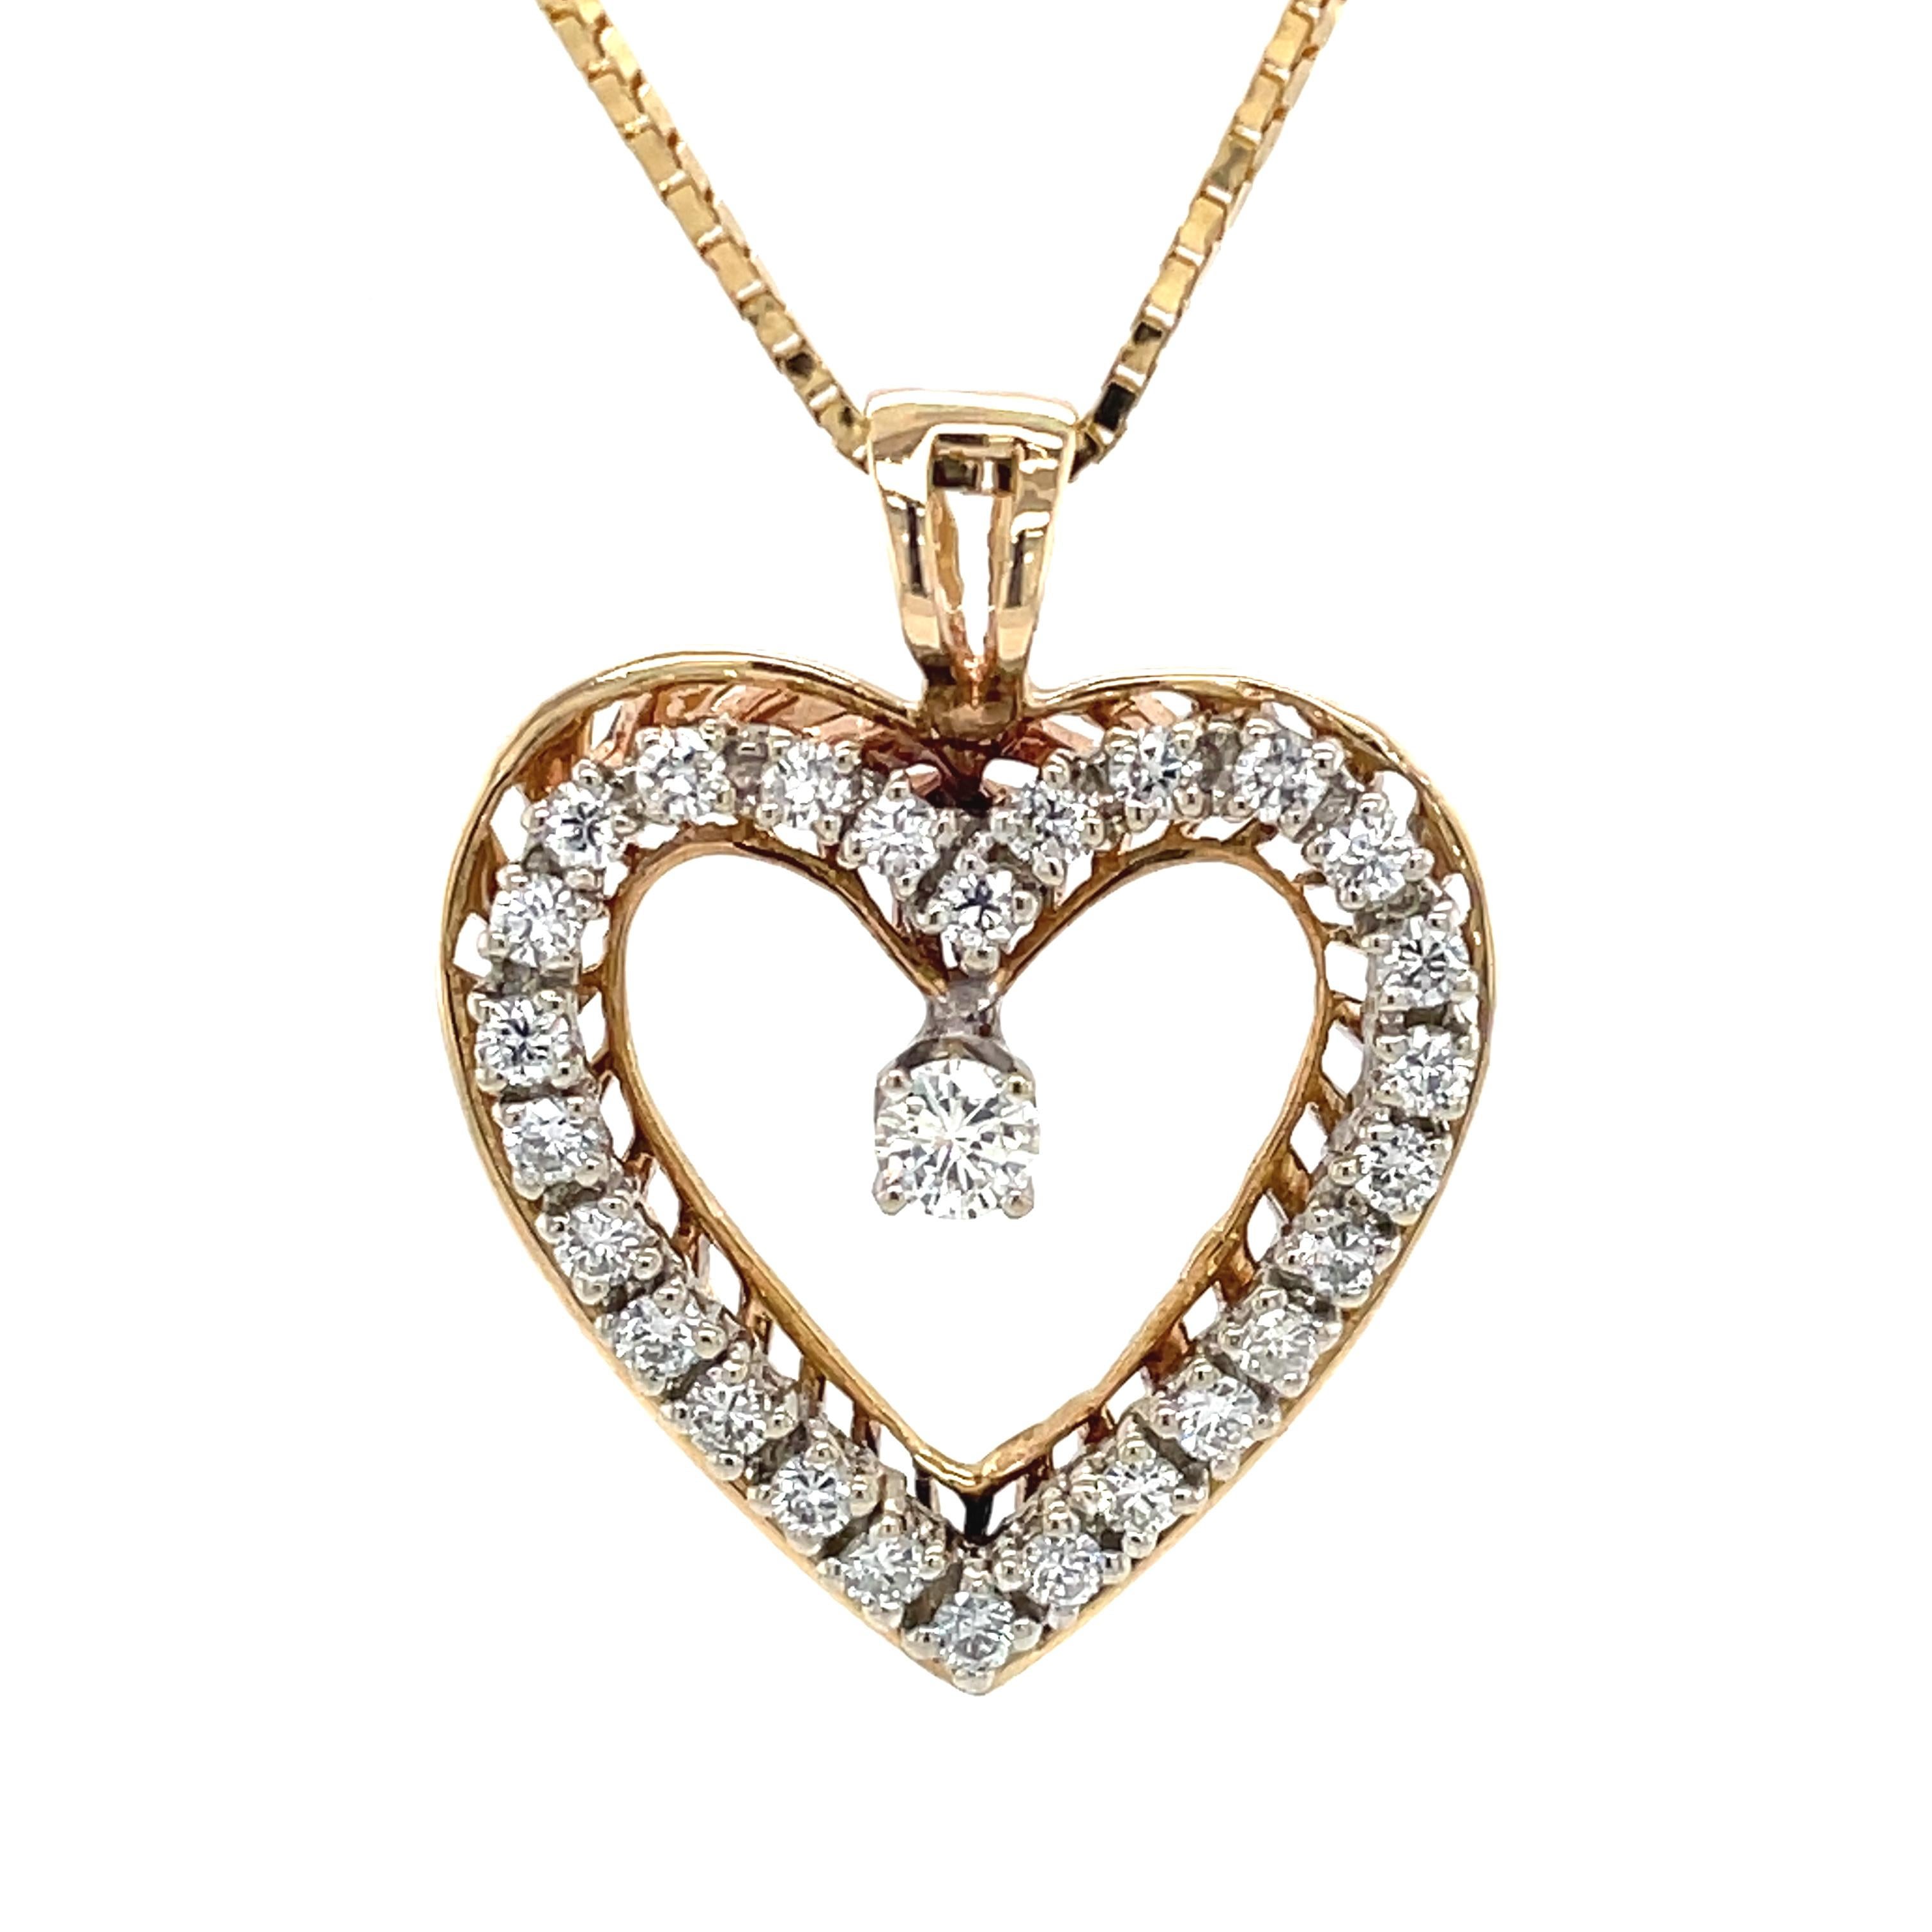 Show her your sentiment with this glistening diamond heart pendant necklace. Crafted of fourteen karat 14K yellow gold, the 7/8 inch x 1 inch open form heart pendant of this lovely necklace is lined with twenty-six sparkling .055 H/SI diamonds, plus